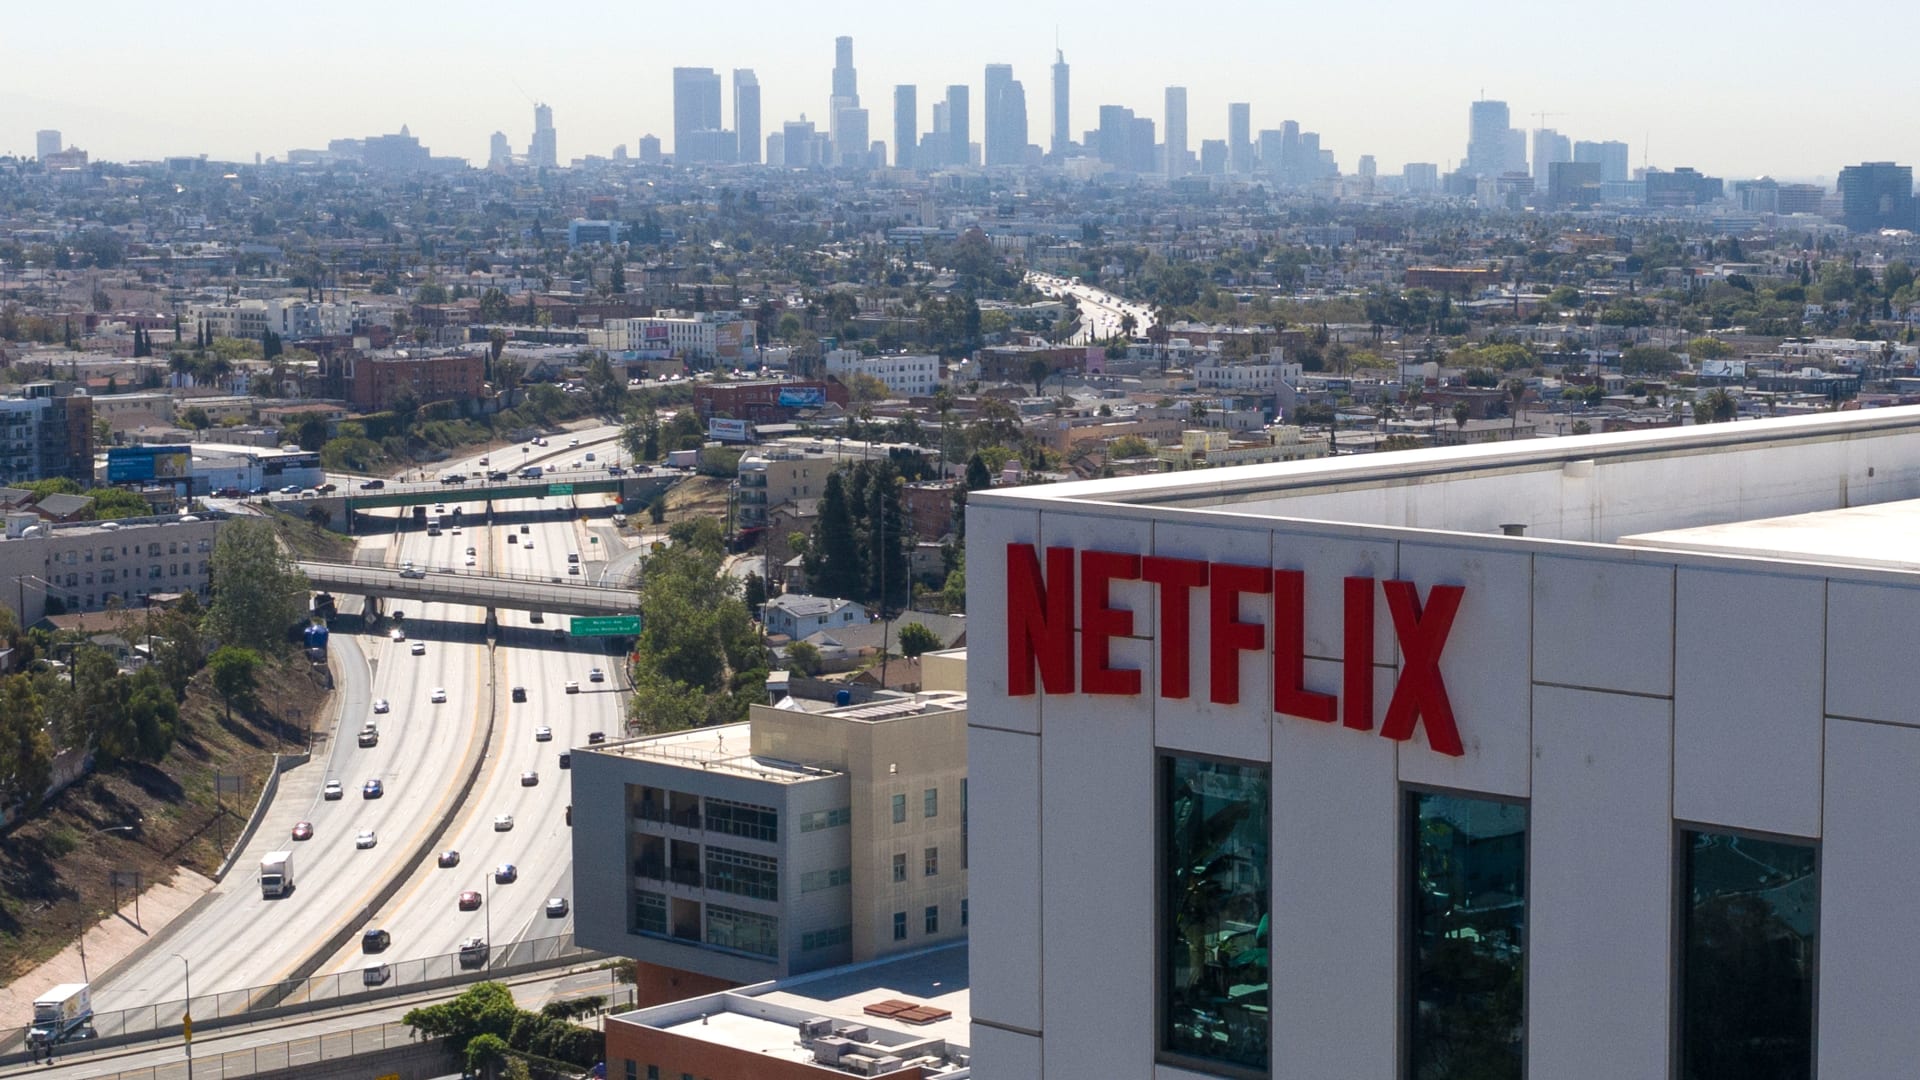 The Netflix office building in Los Angeles.